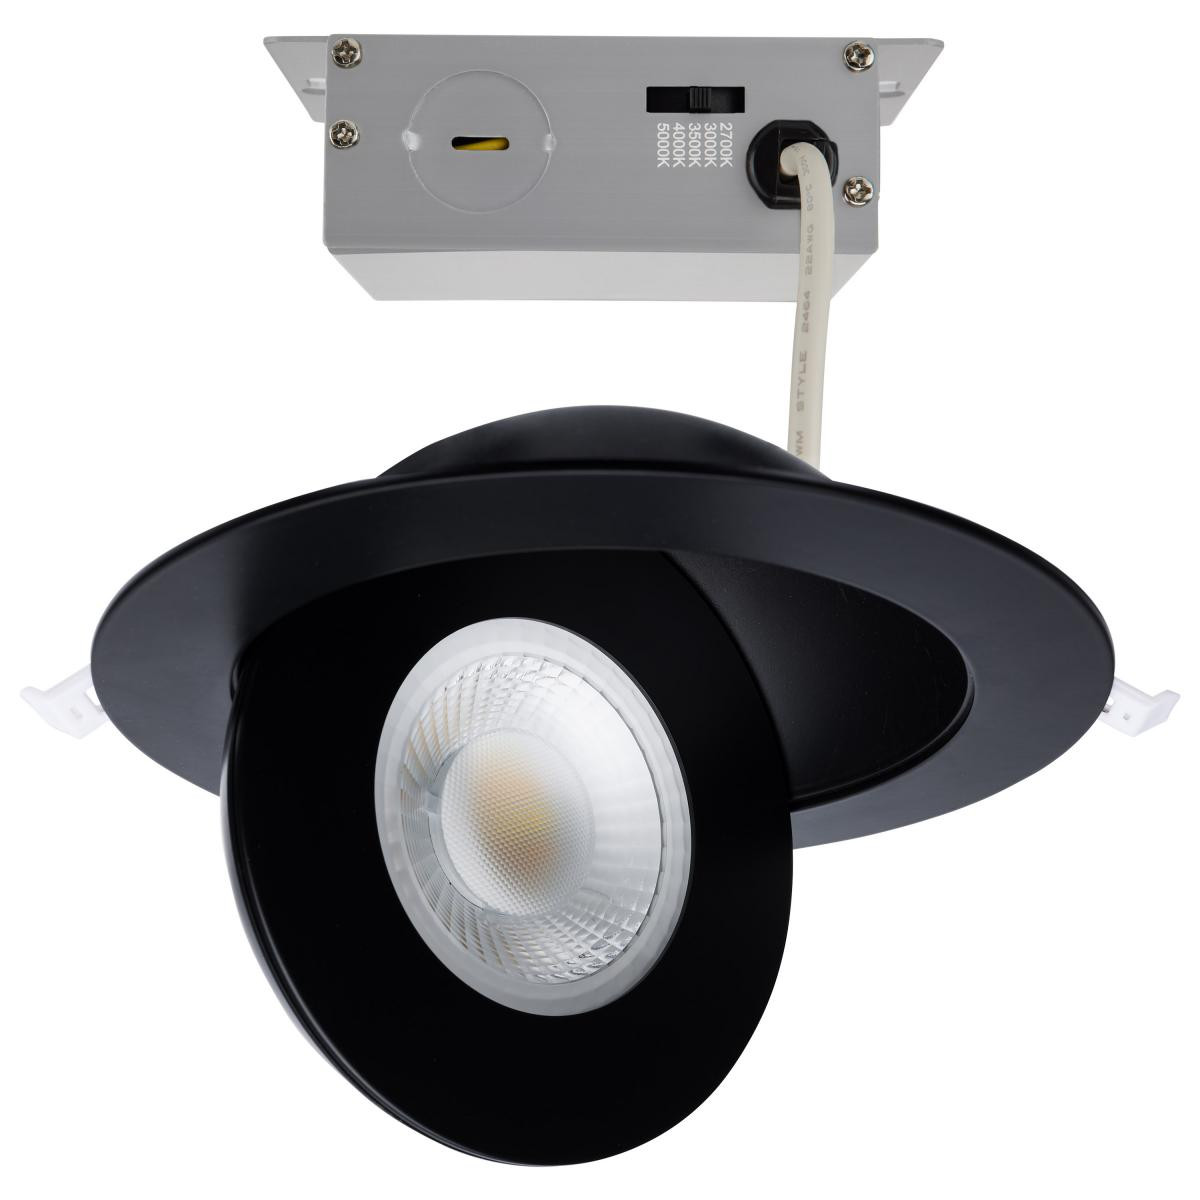 6 Inch Round LED Gimbaled Downlight - 15W - 1400 Lumens - 120V - Color Temperature Selectable 27K/30K/35K/40K/50K - Black Finish - No Recess Can Required